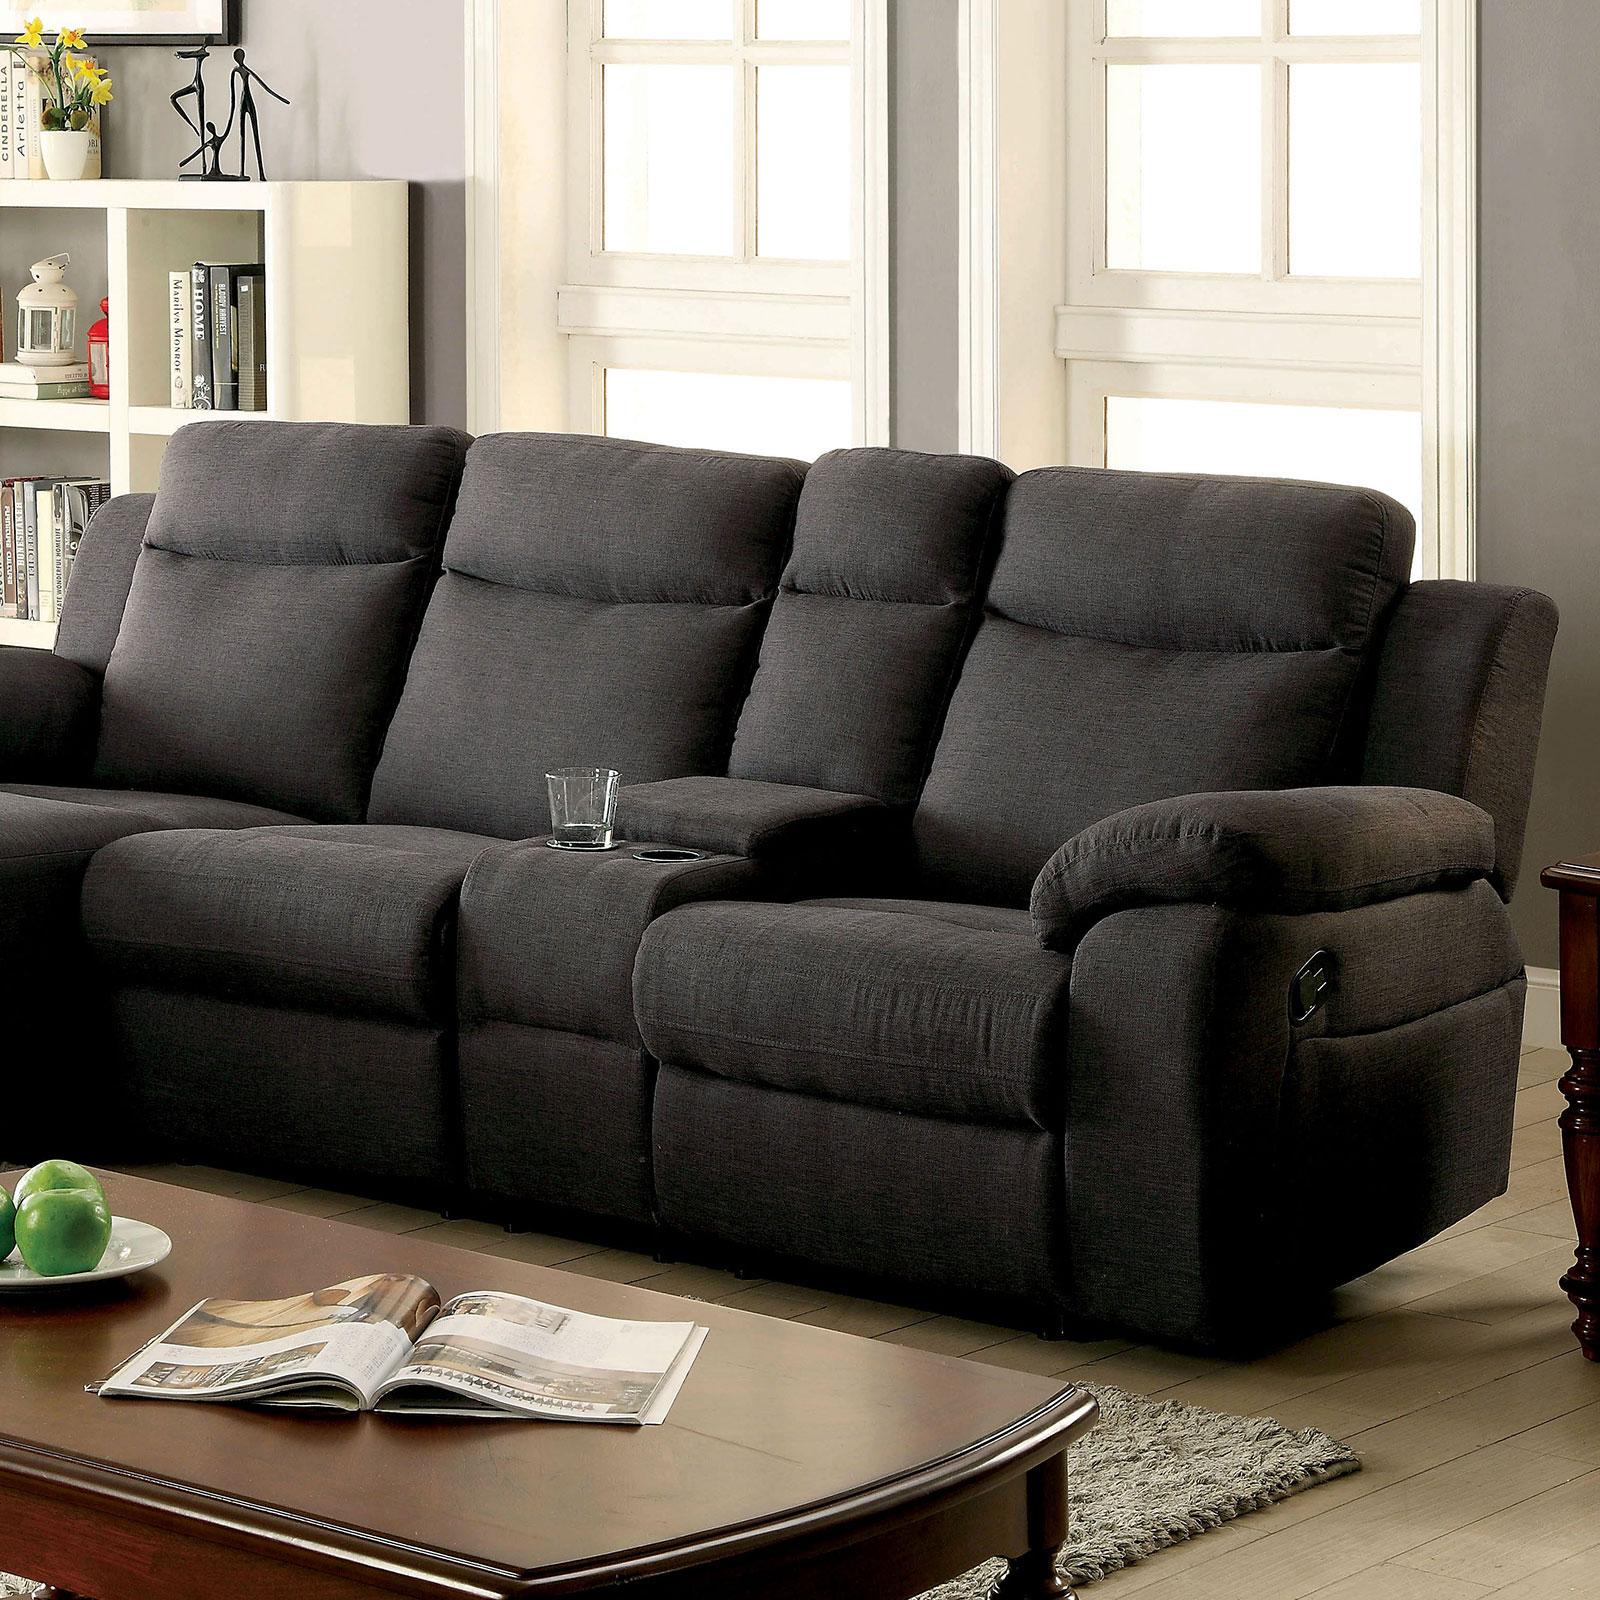 Transitional Reclining Sectional KAMRYN CM6771GY CM6771GY-SECTIONAL in Gray Fabric